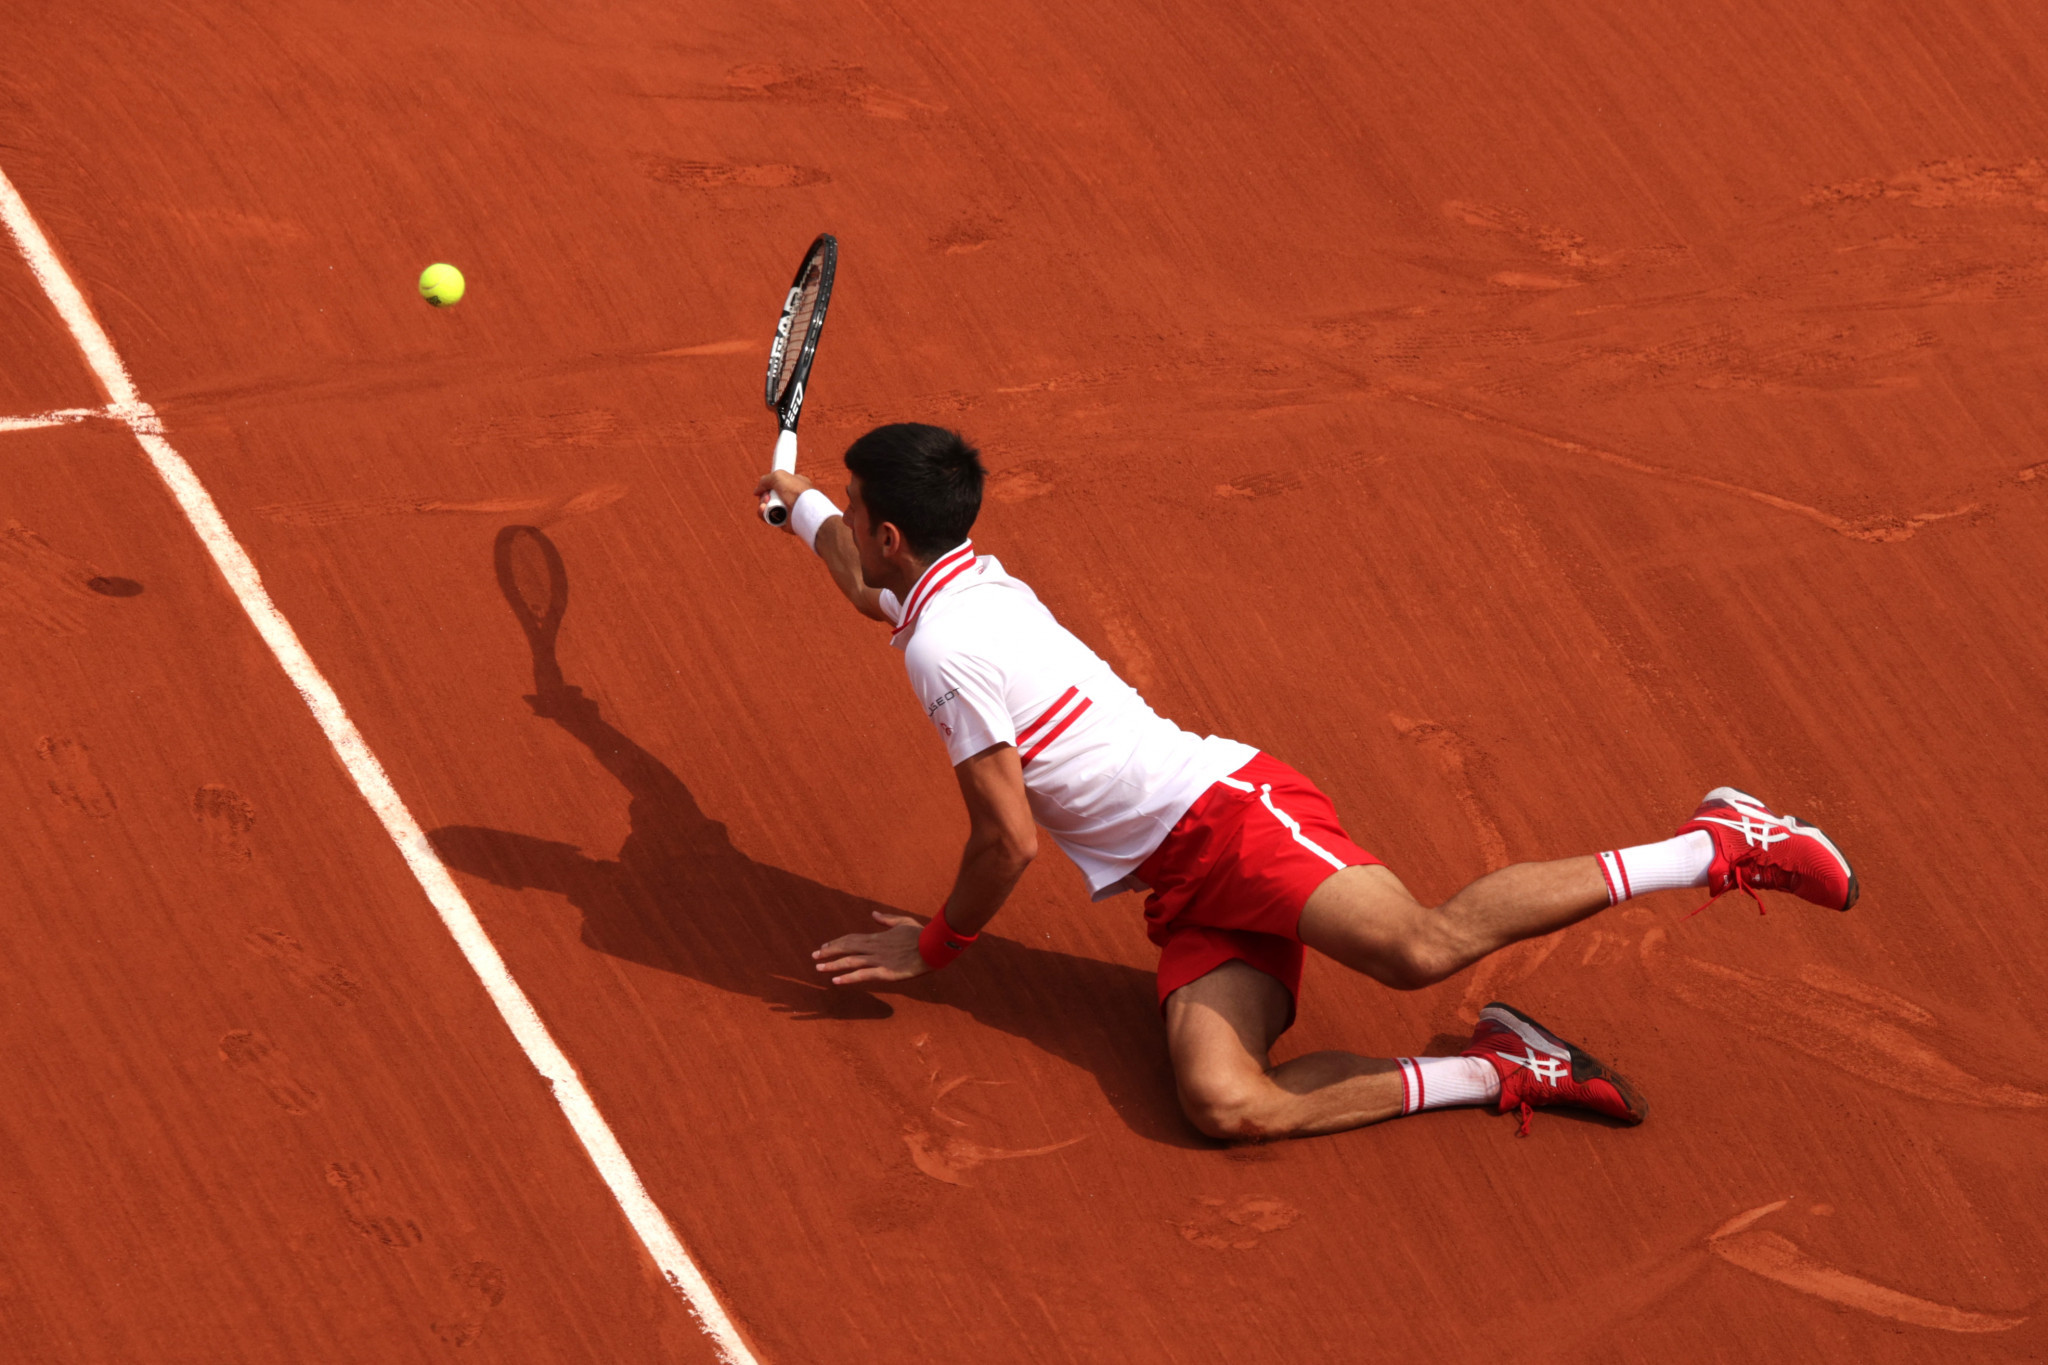 Men's top seed Novak Djokovic battled back from two sets down to beat Lorenzo Musetti at the French Open ©Getty Images